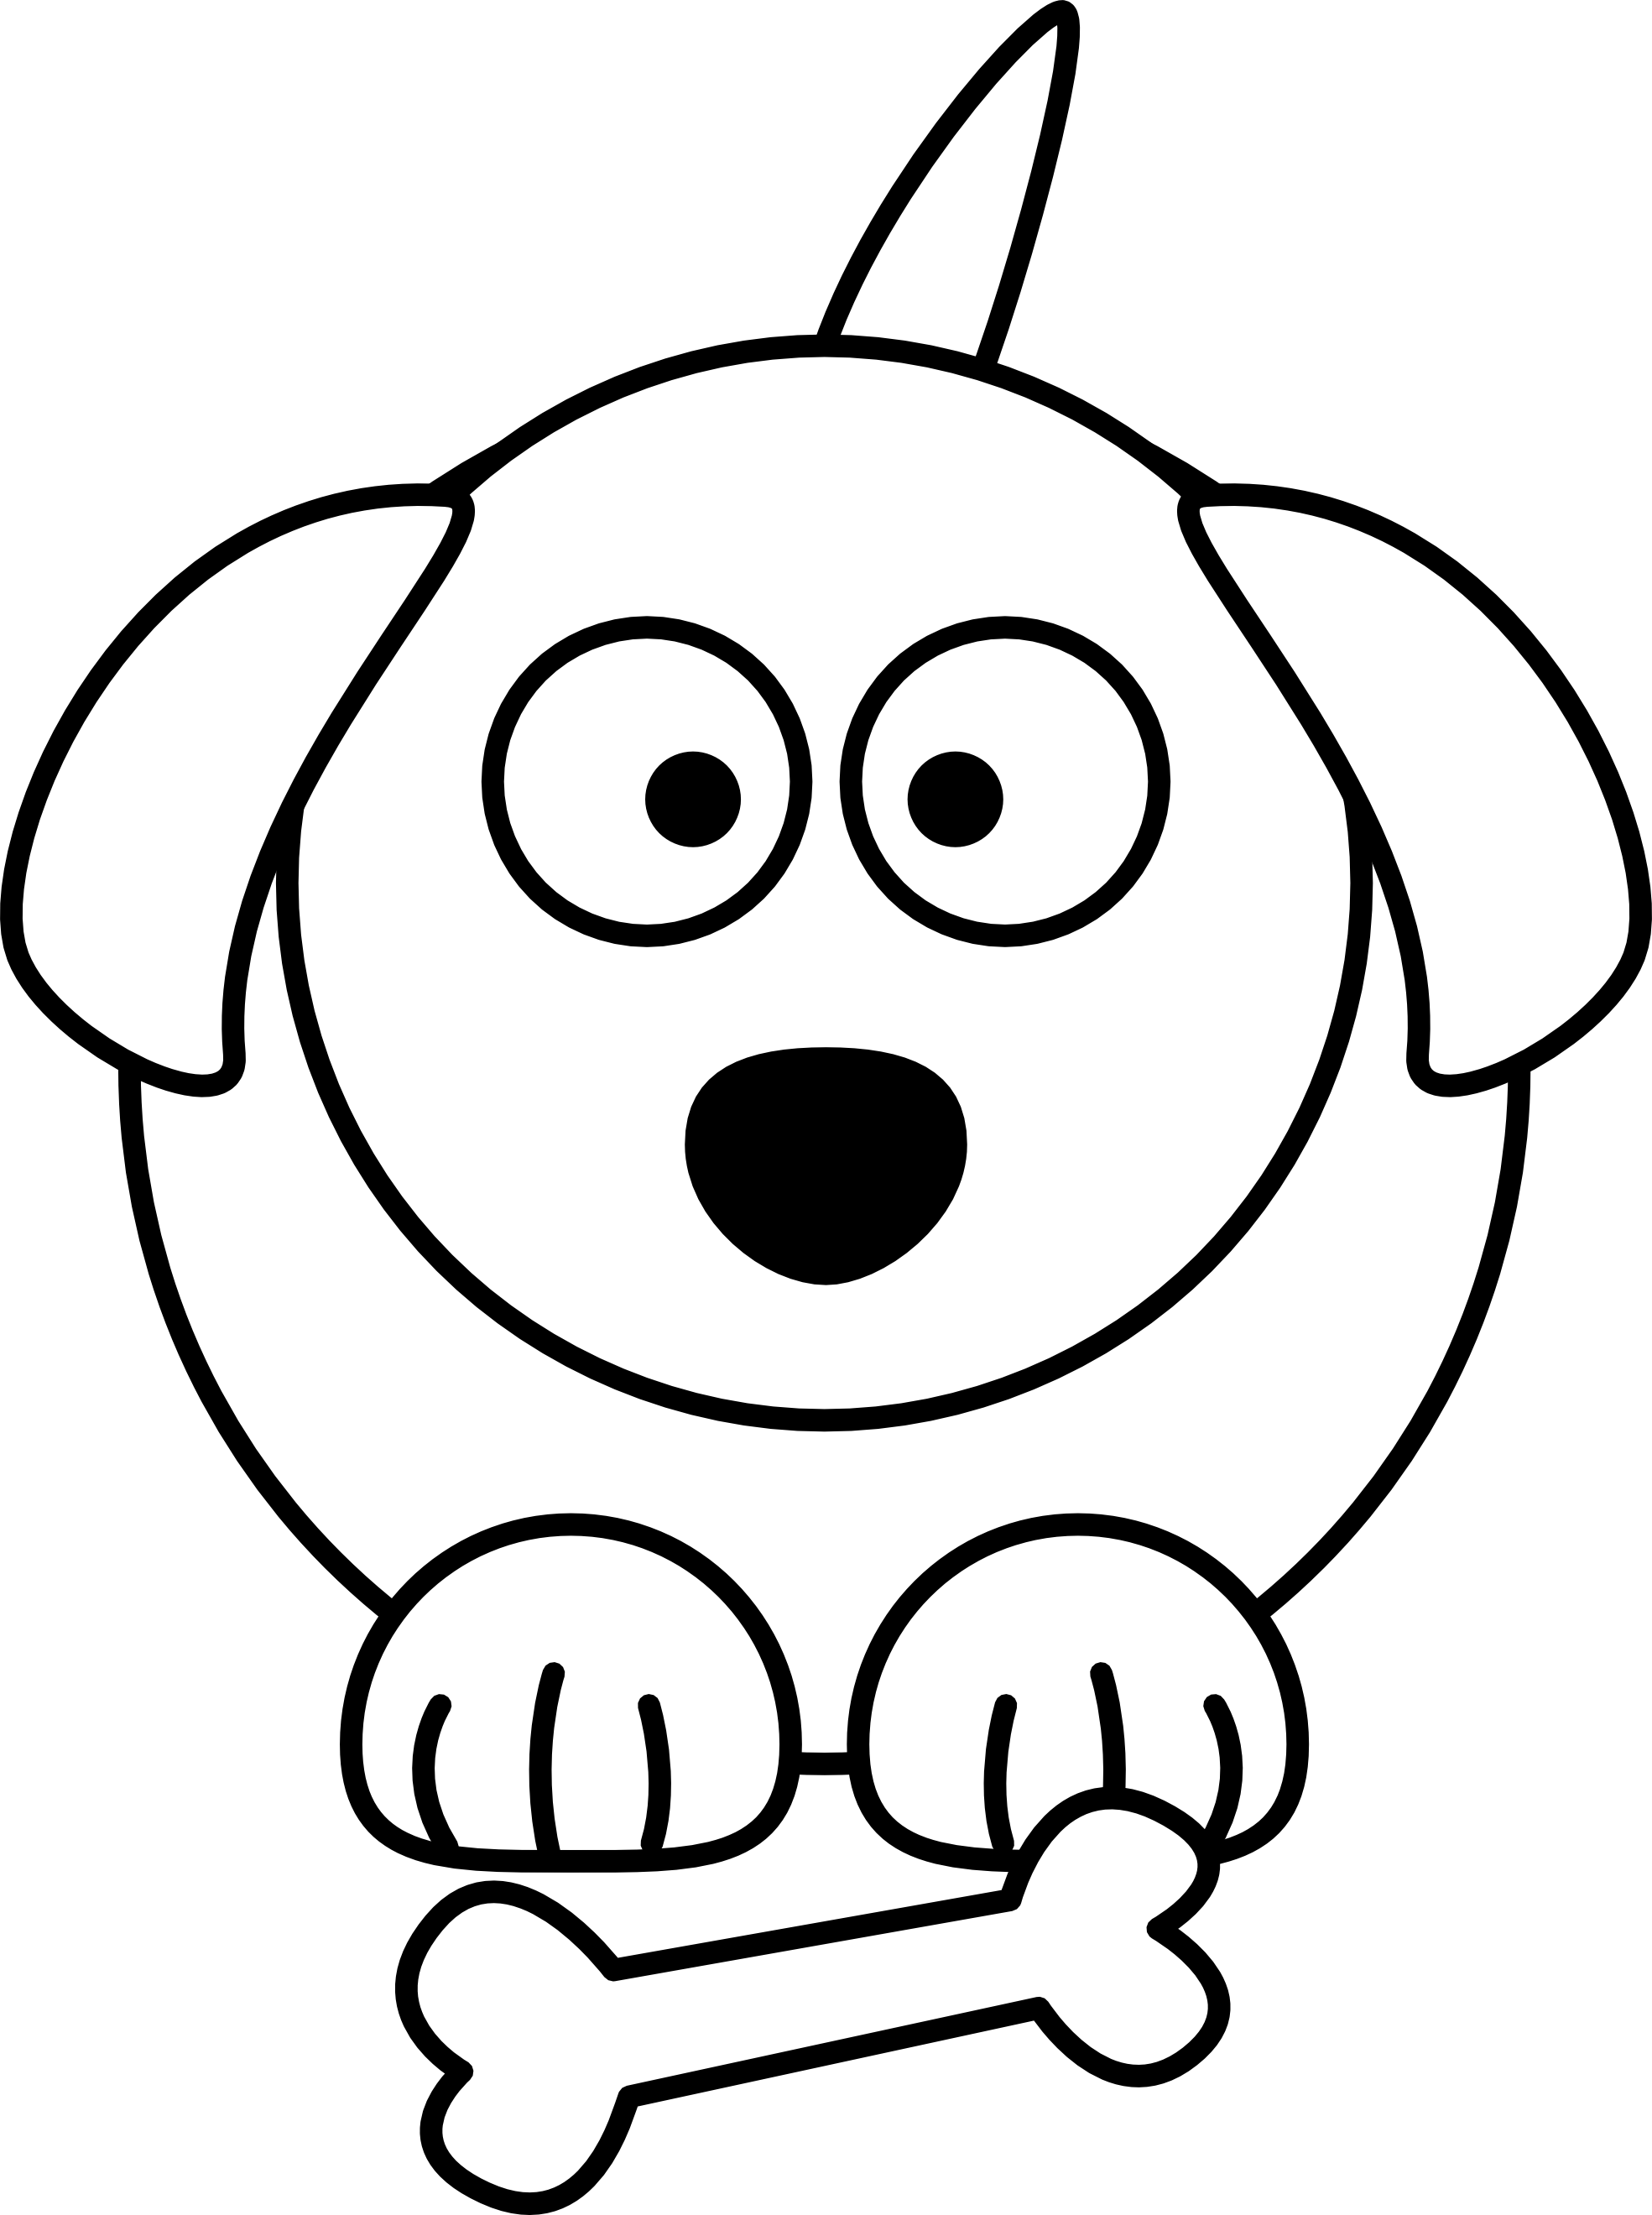 Free Dog Cartoon Drawings Download Free Clip Art Free Clip Art On Clipart Library